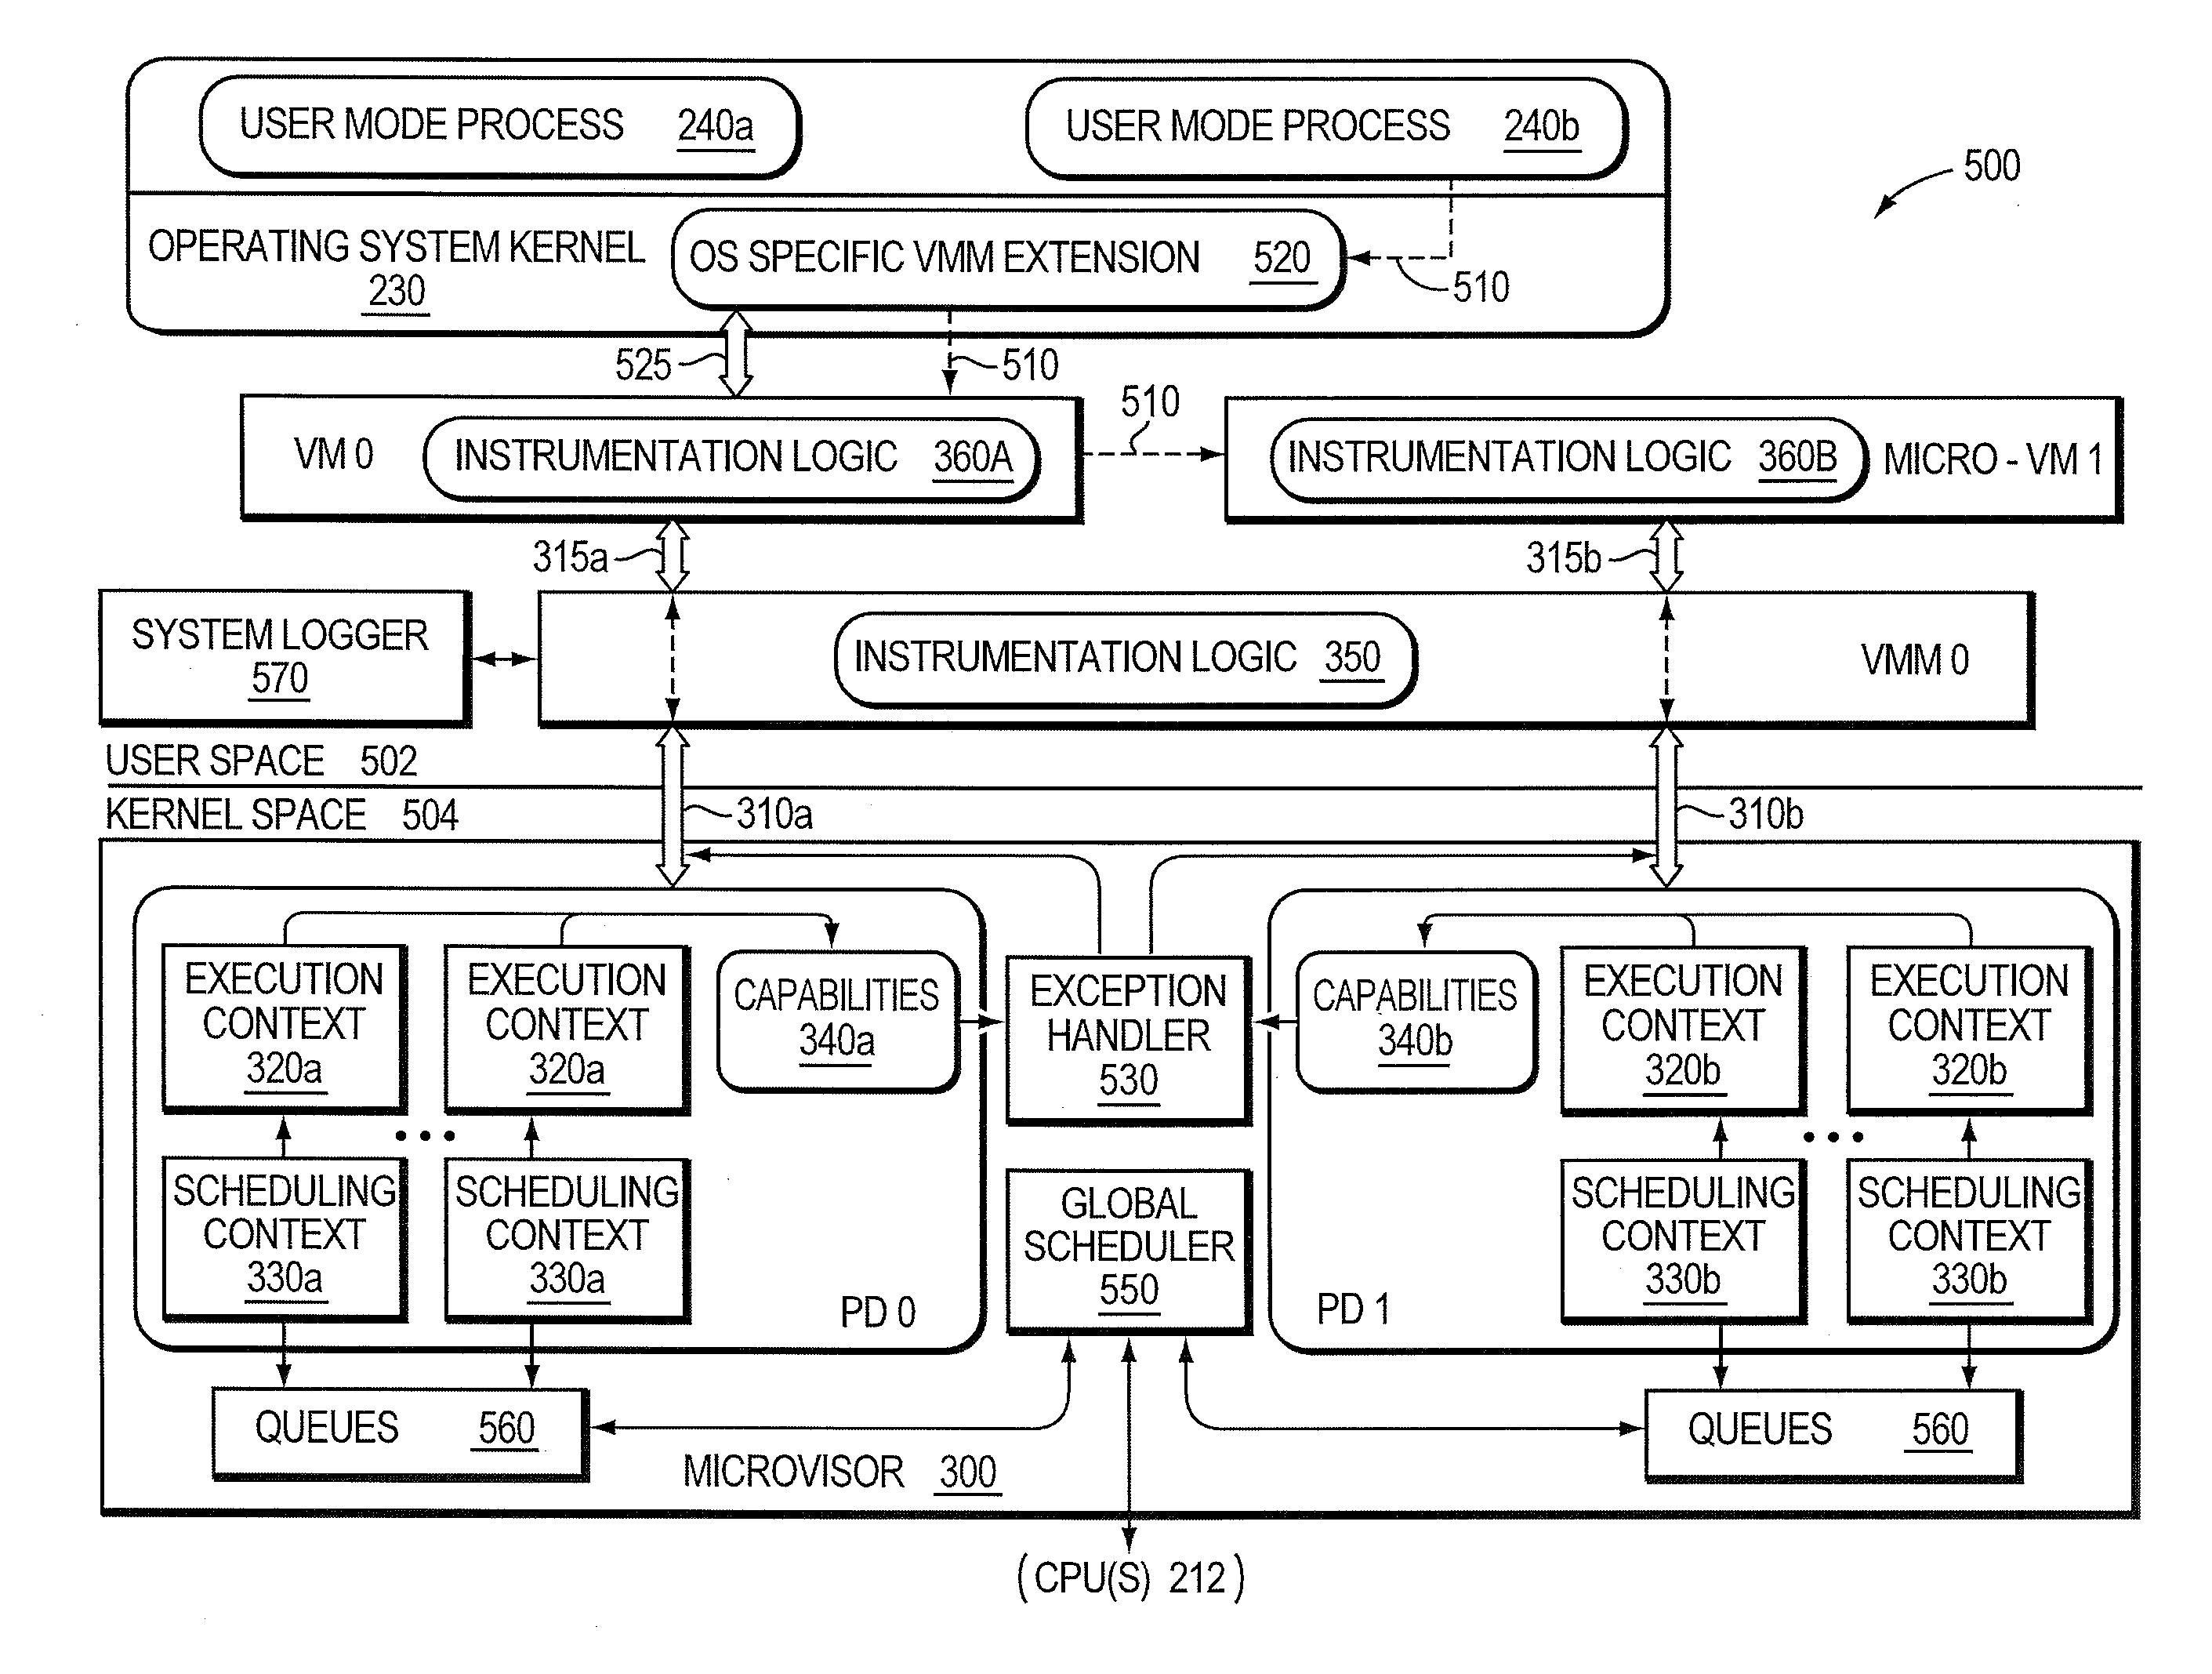 Micro-virtualization architecture for threat-aware microvisor deployment in a node of a network environment